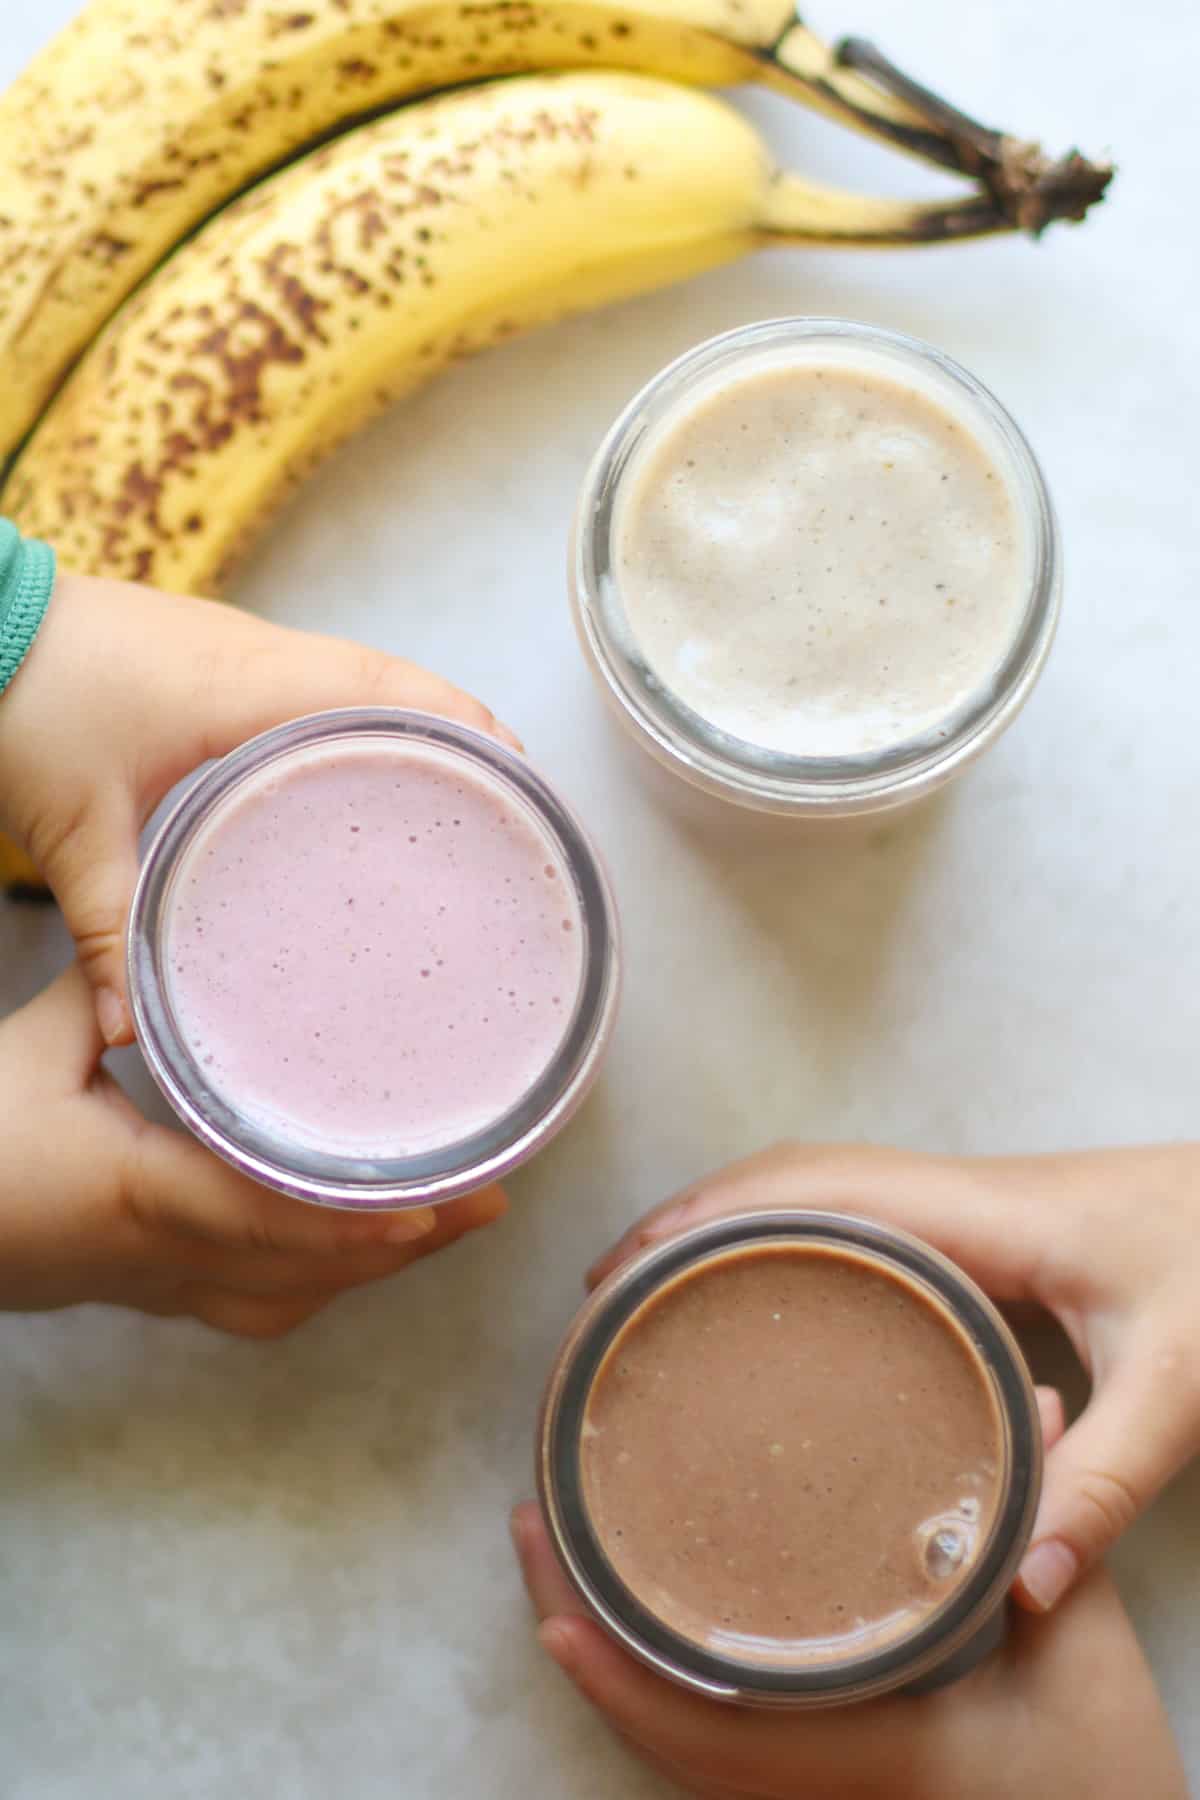 An overhead shot of 3 different flavored banana milkshakes with two toddler hands wrapped around the glass jars.